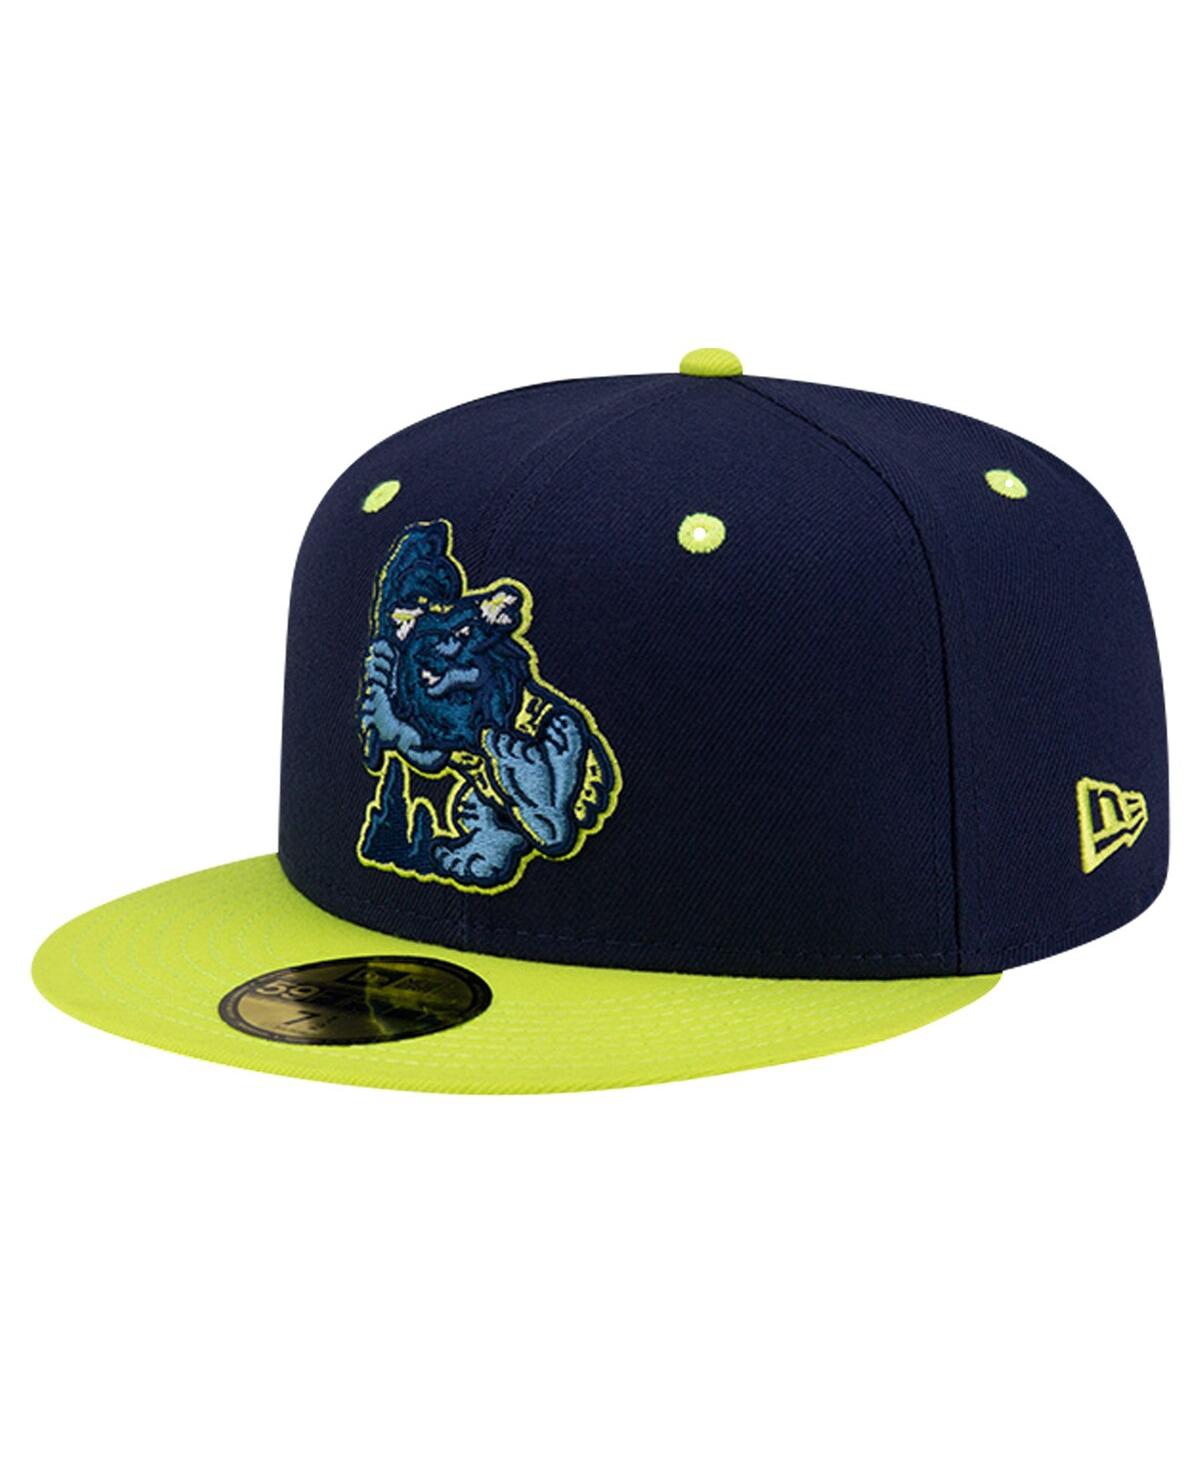 Men's Navy Bowling Green Hot Rods Theme Night Cavemen 59FIFTY Fitted Hat - Navy